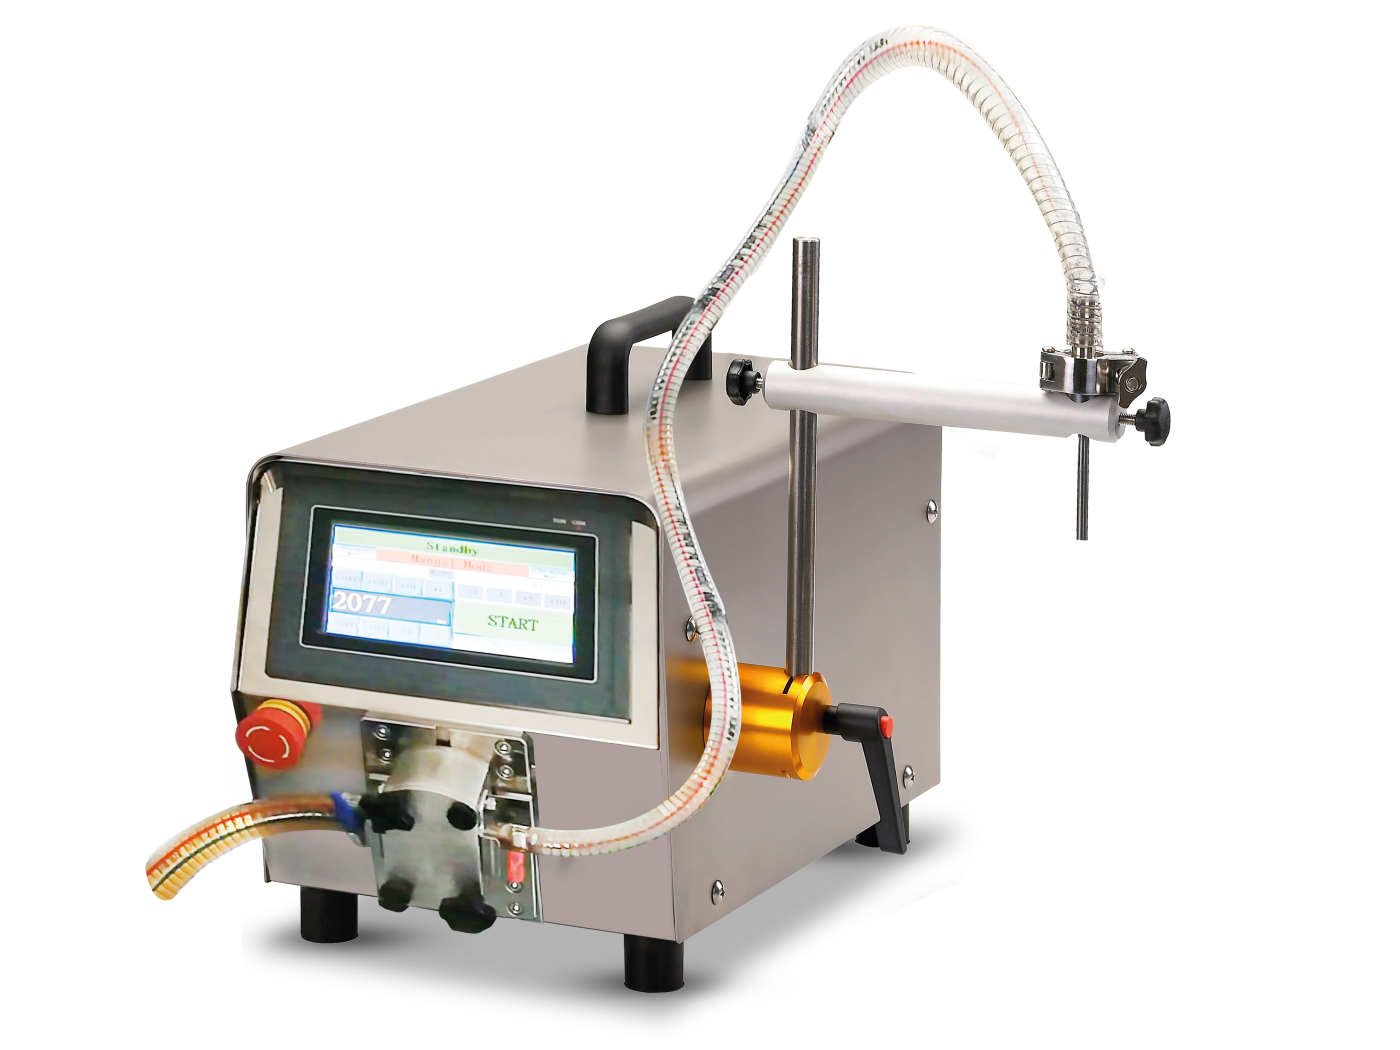 Electronic Tabletop Gear Pump Liquid Filler (Ipm-Fg1000) with Touch Screen